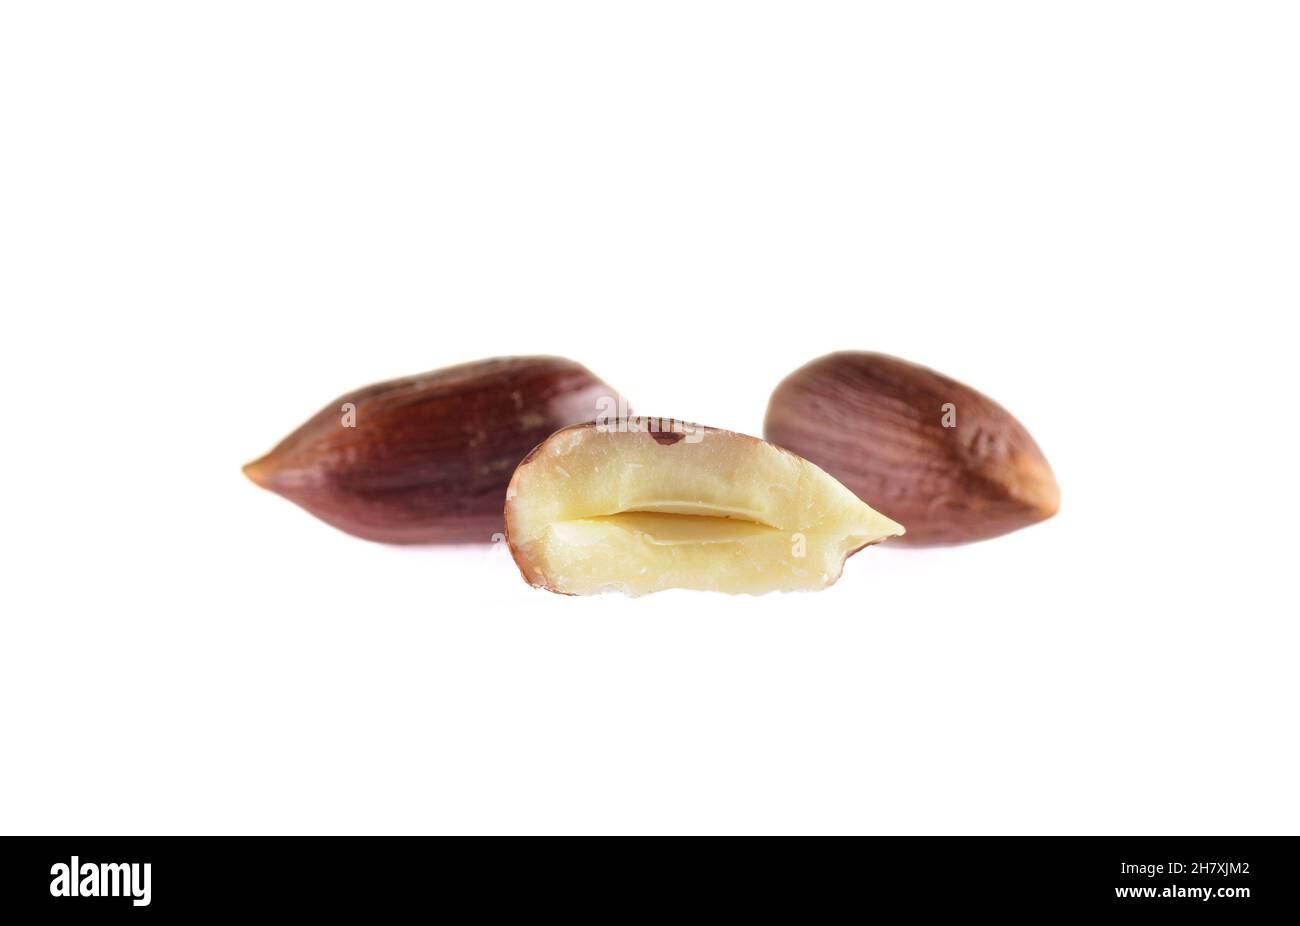 Closeup view of hazelnuts over white background. Stock Photo